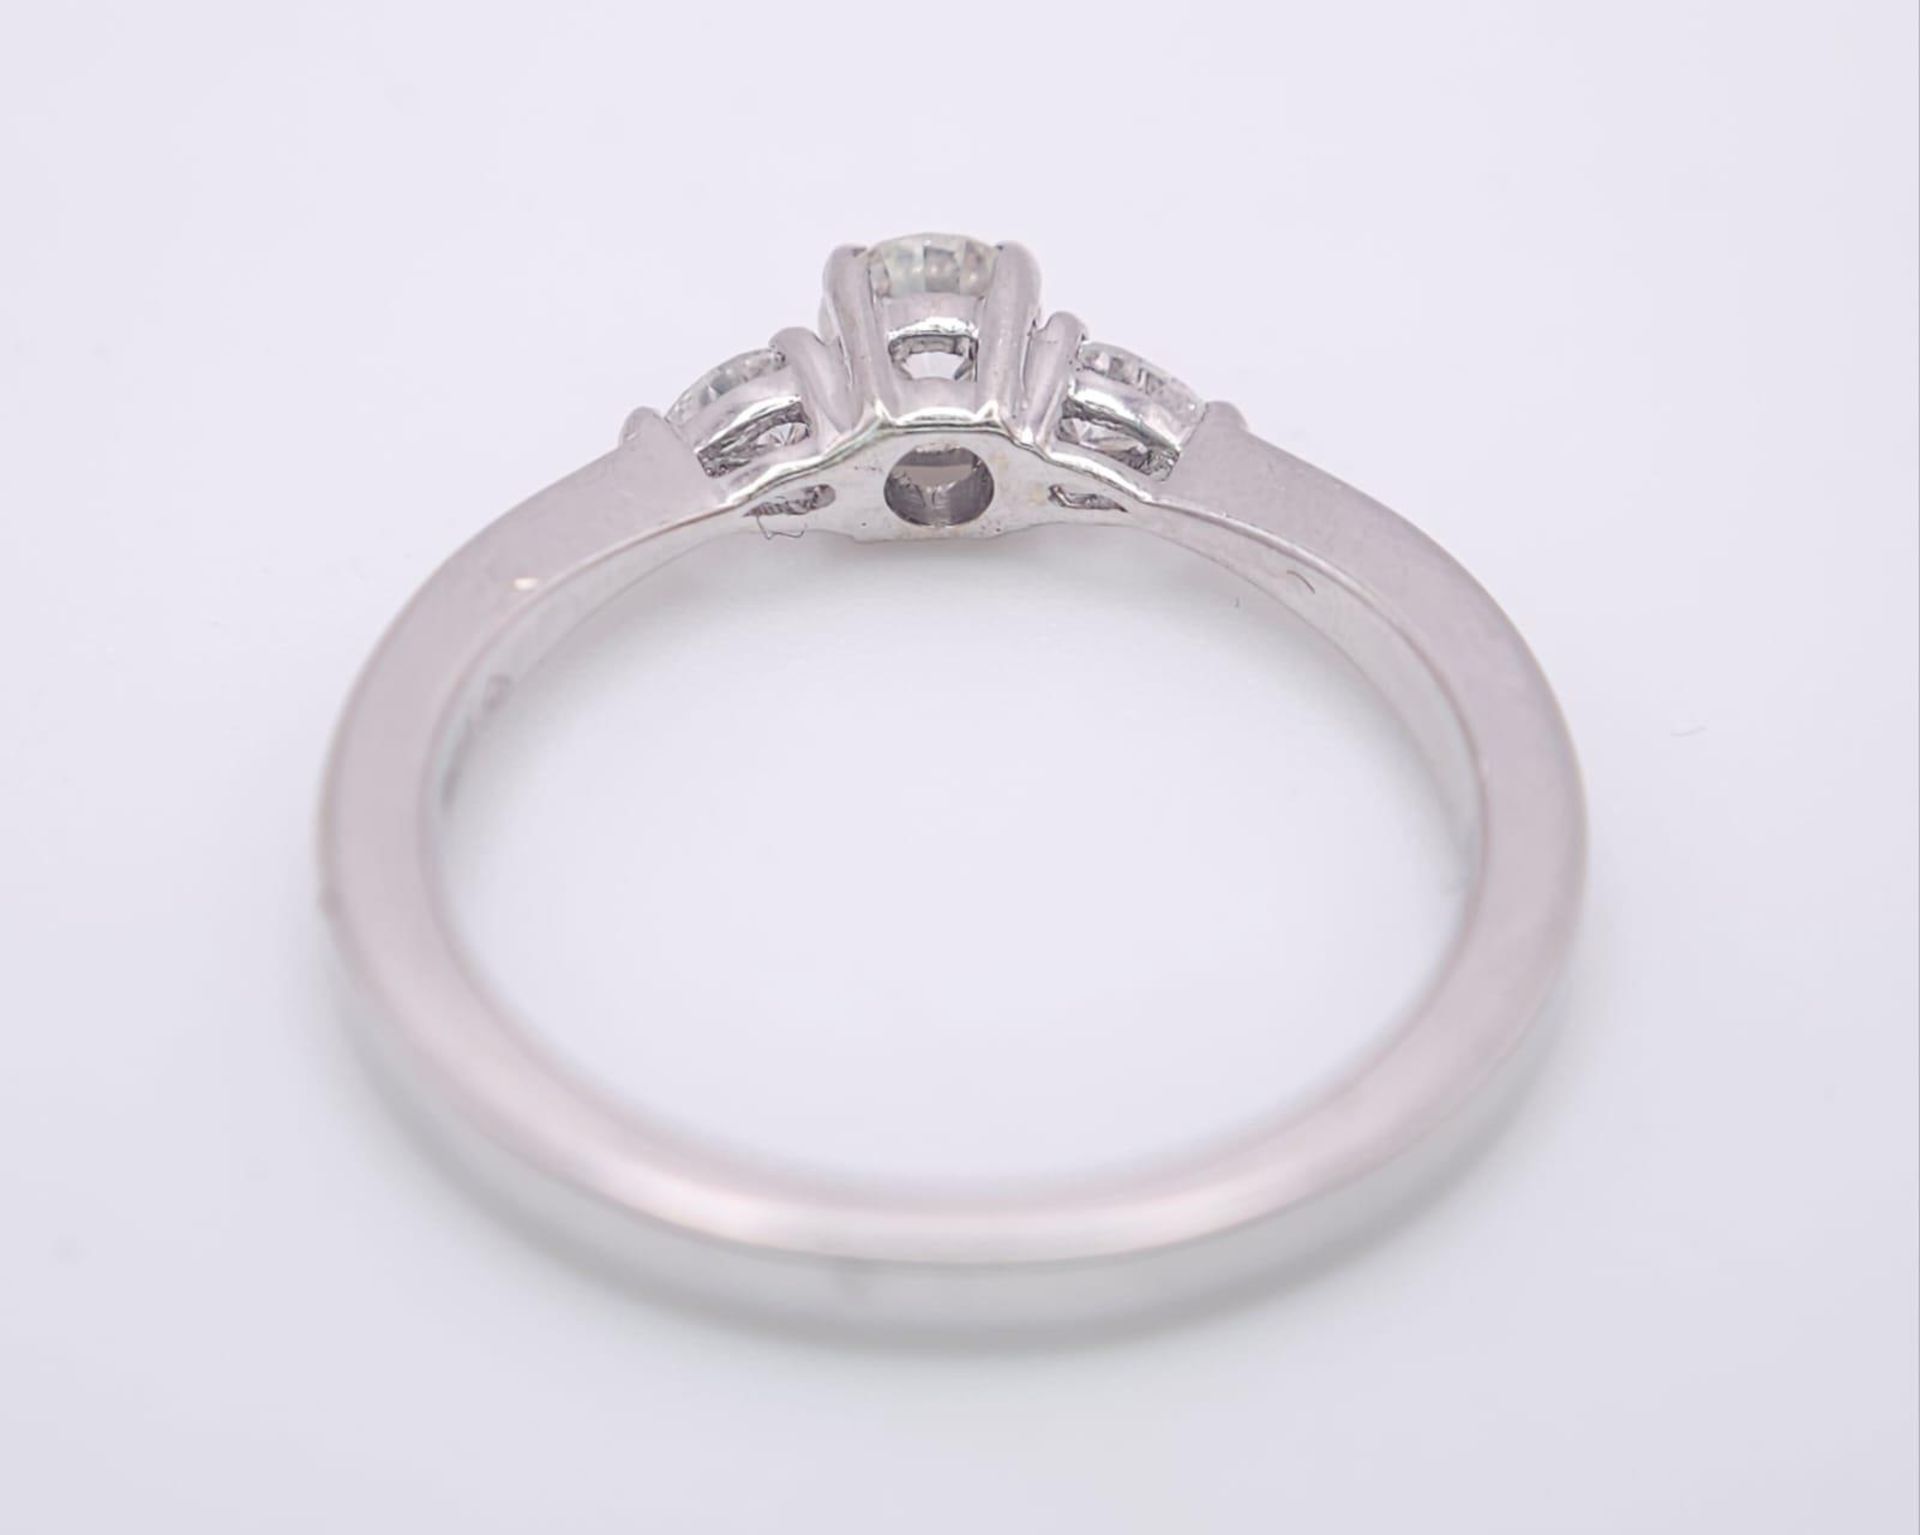 AN 18K WHITE GOLD DIAMOND RING WITH PEAR SHAPED DIAMOND ACCENTS ON SHOULDERS. 0.40CTW OF PEAR SHAPED - Bild 4 aus 7